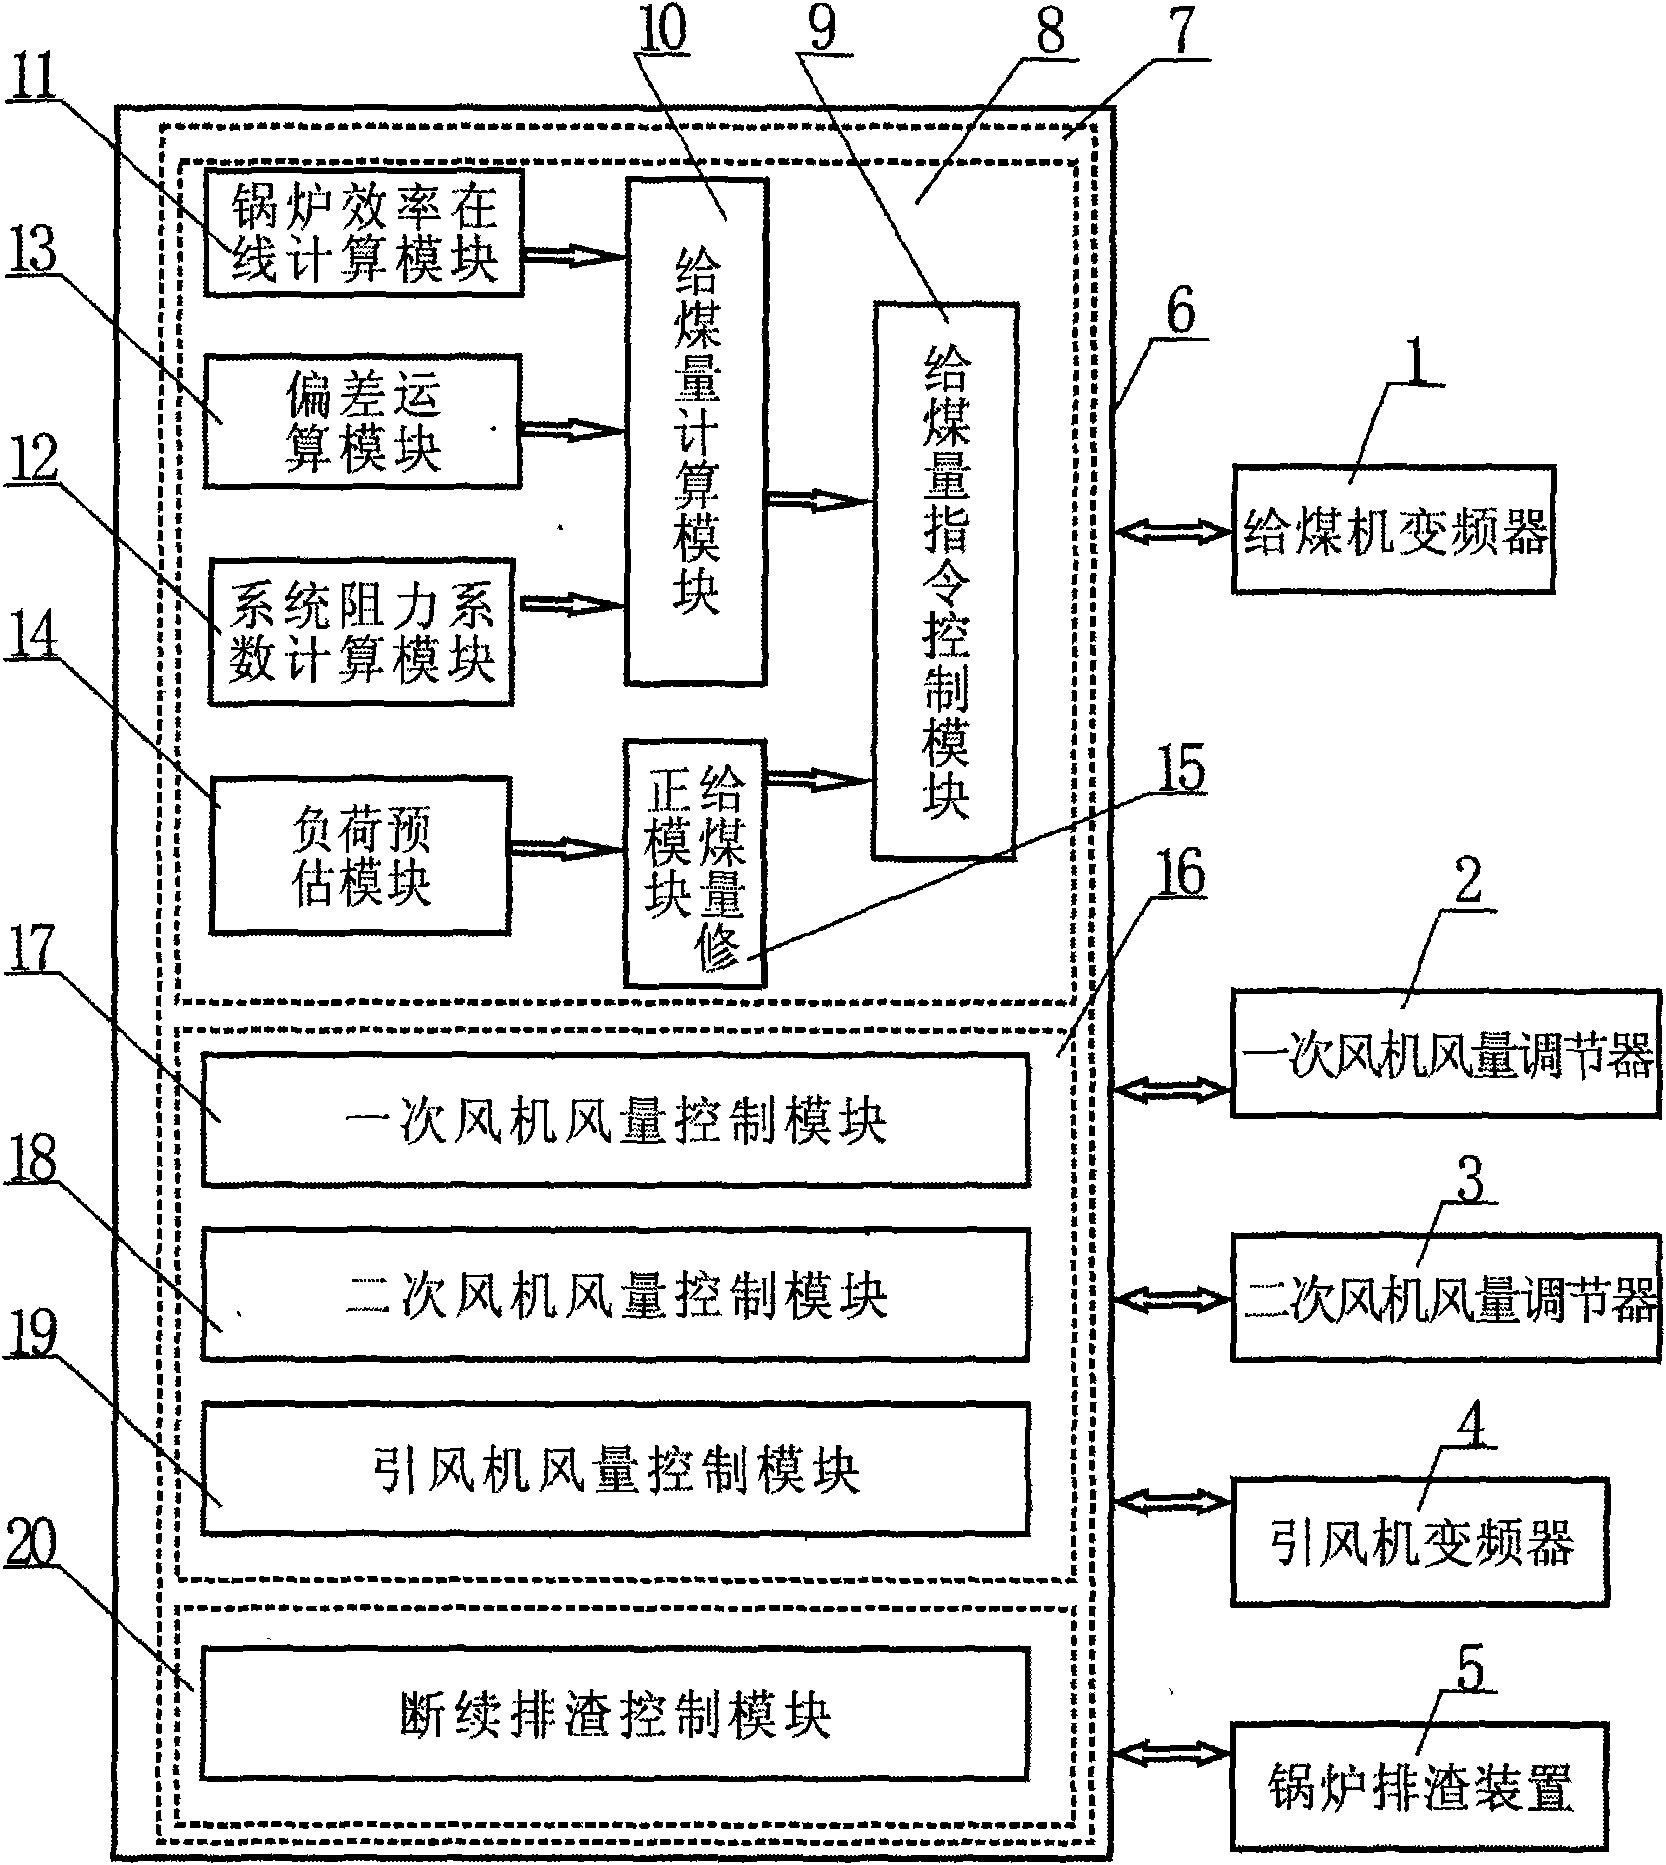 Automatic boiler combustion control system of circulating fluid bed